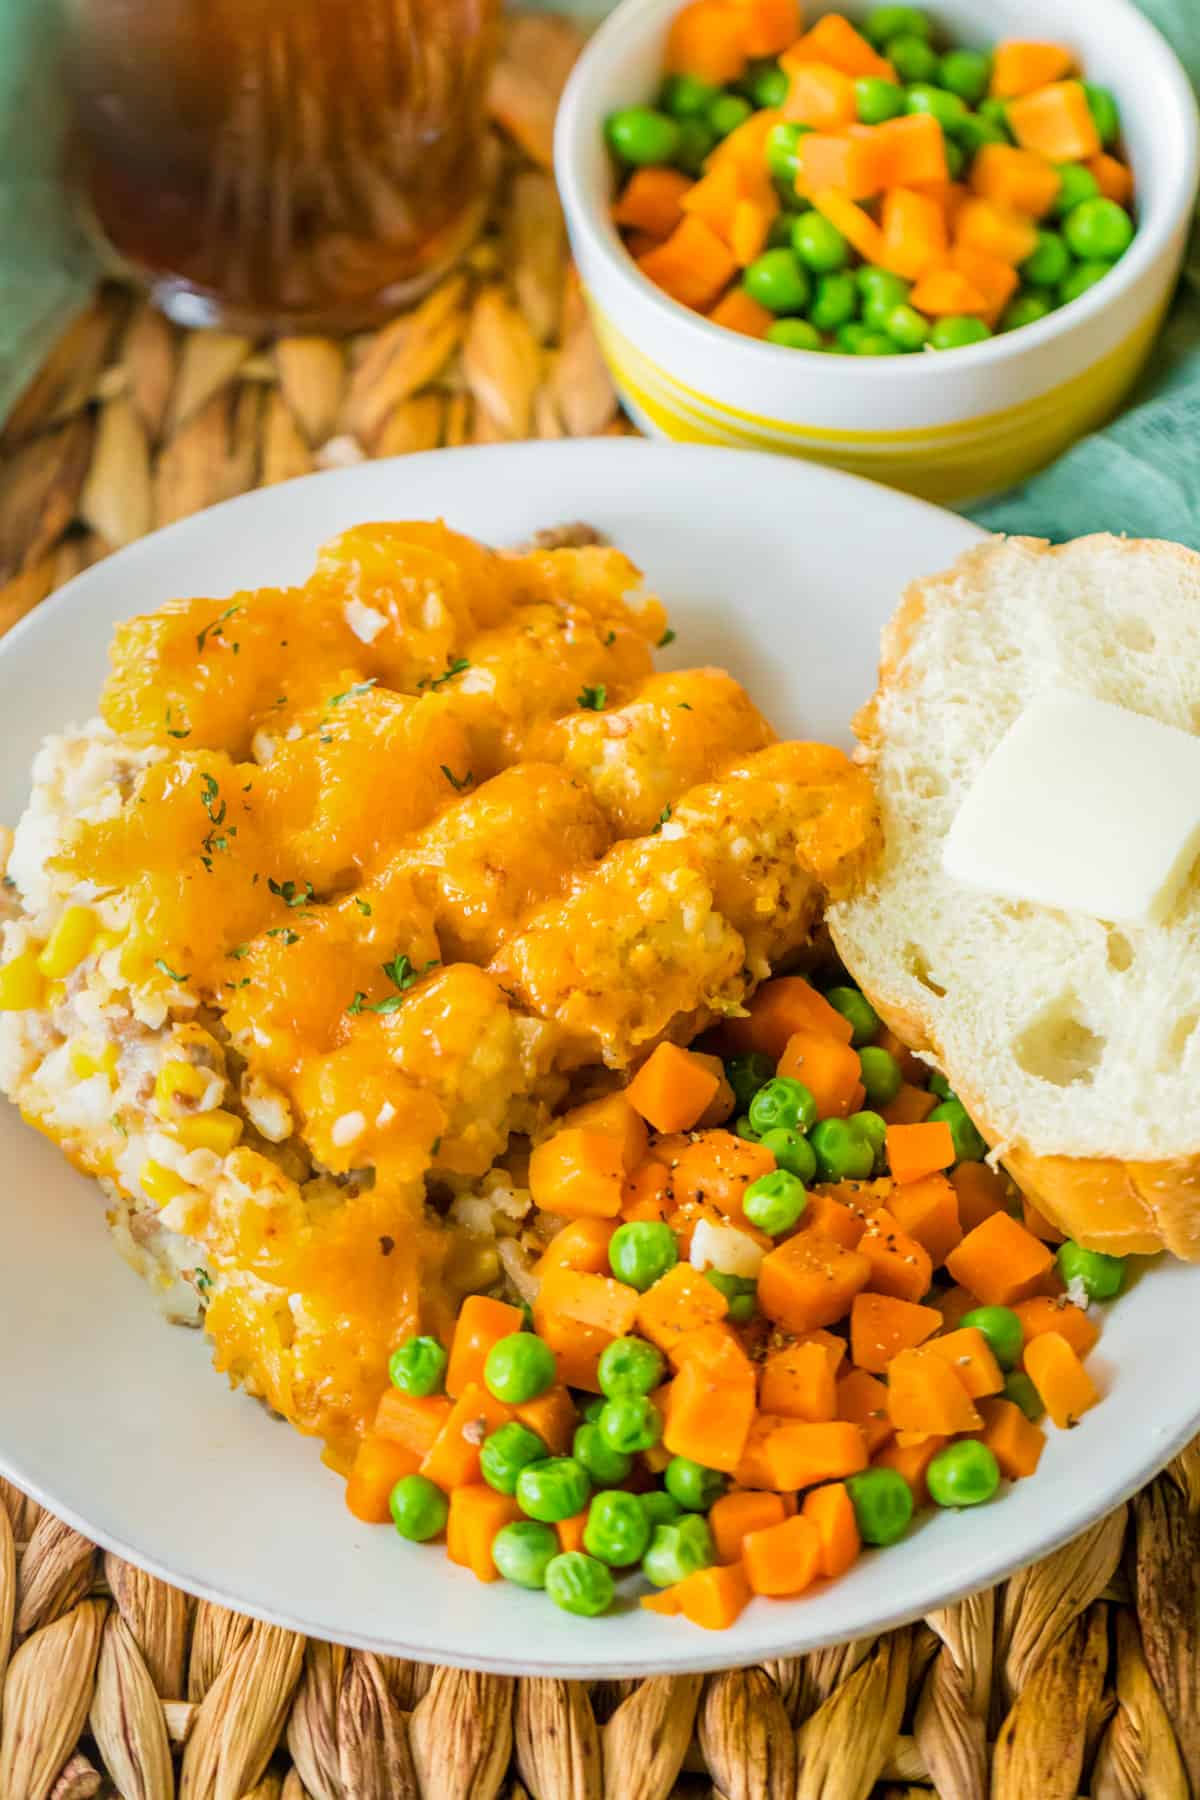 Ground Beef tater tot casserole served with peas, carrots, and buttered bread.